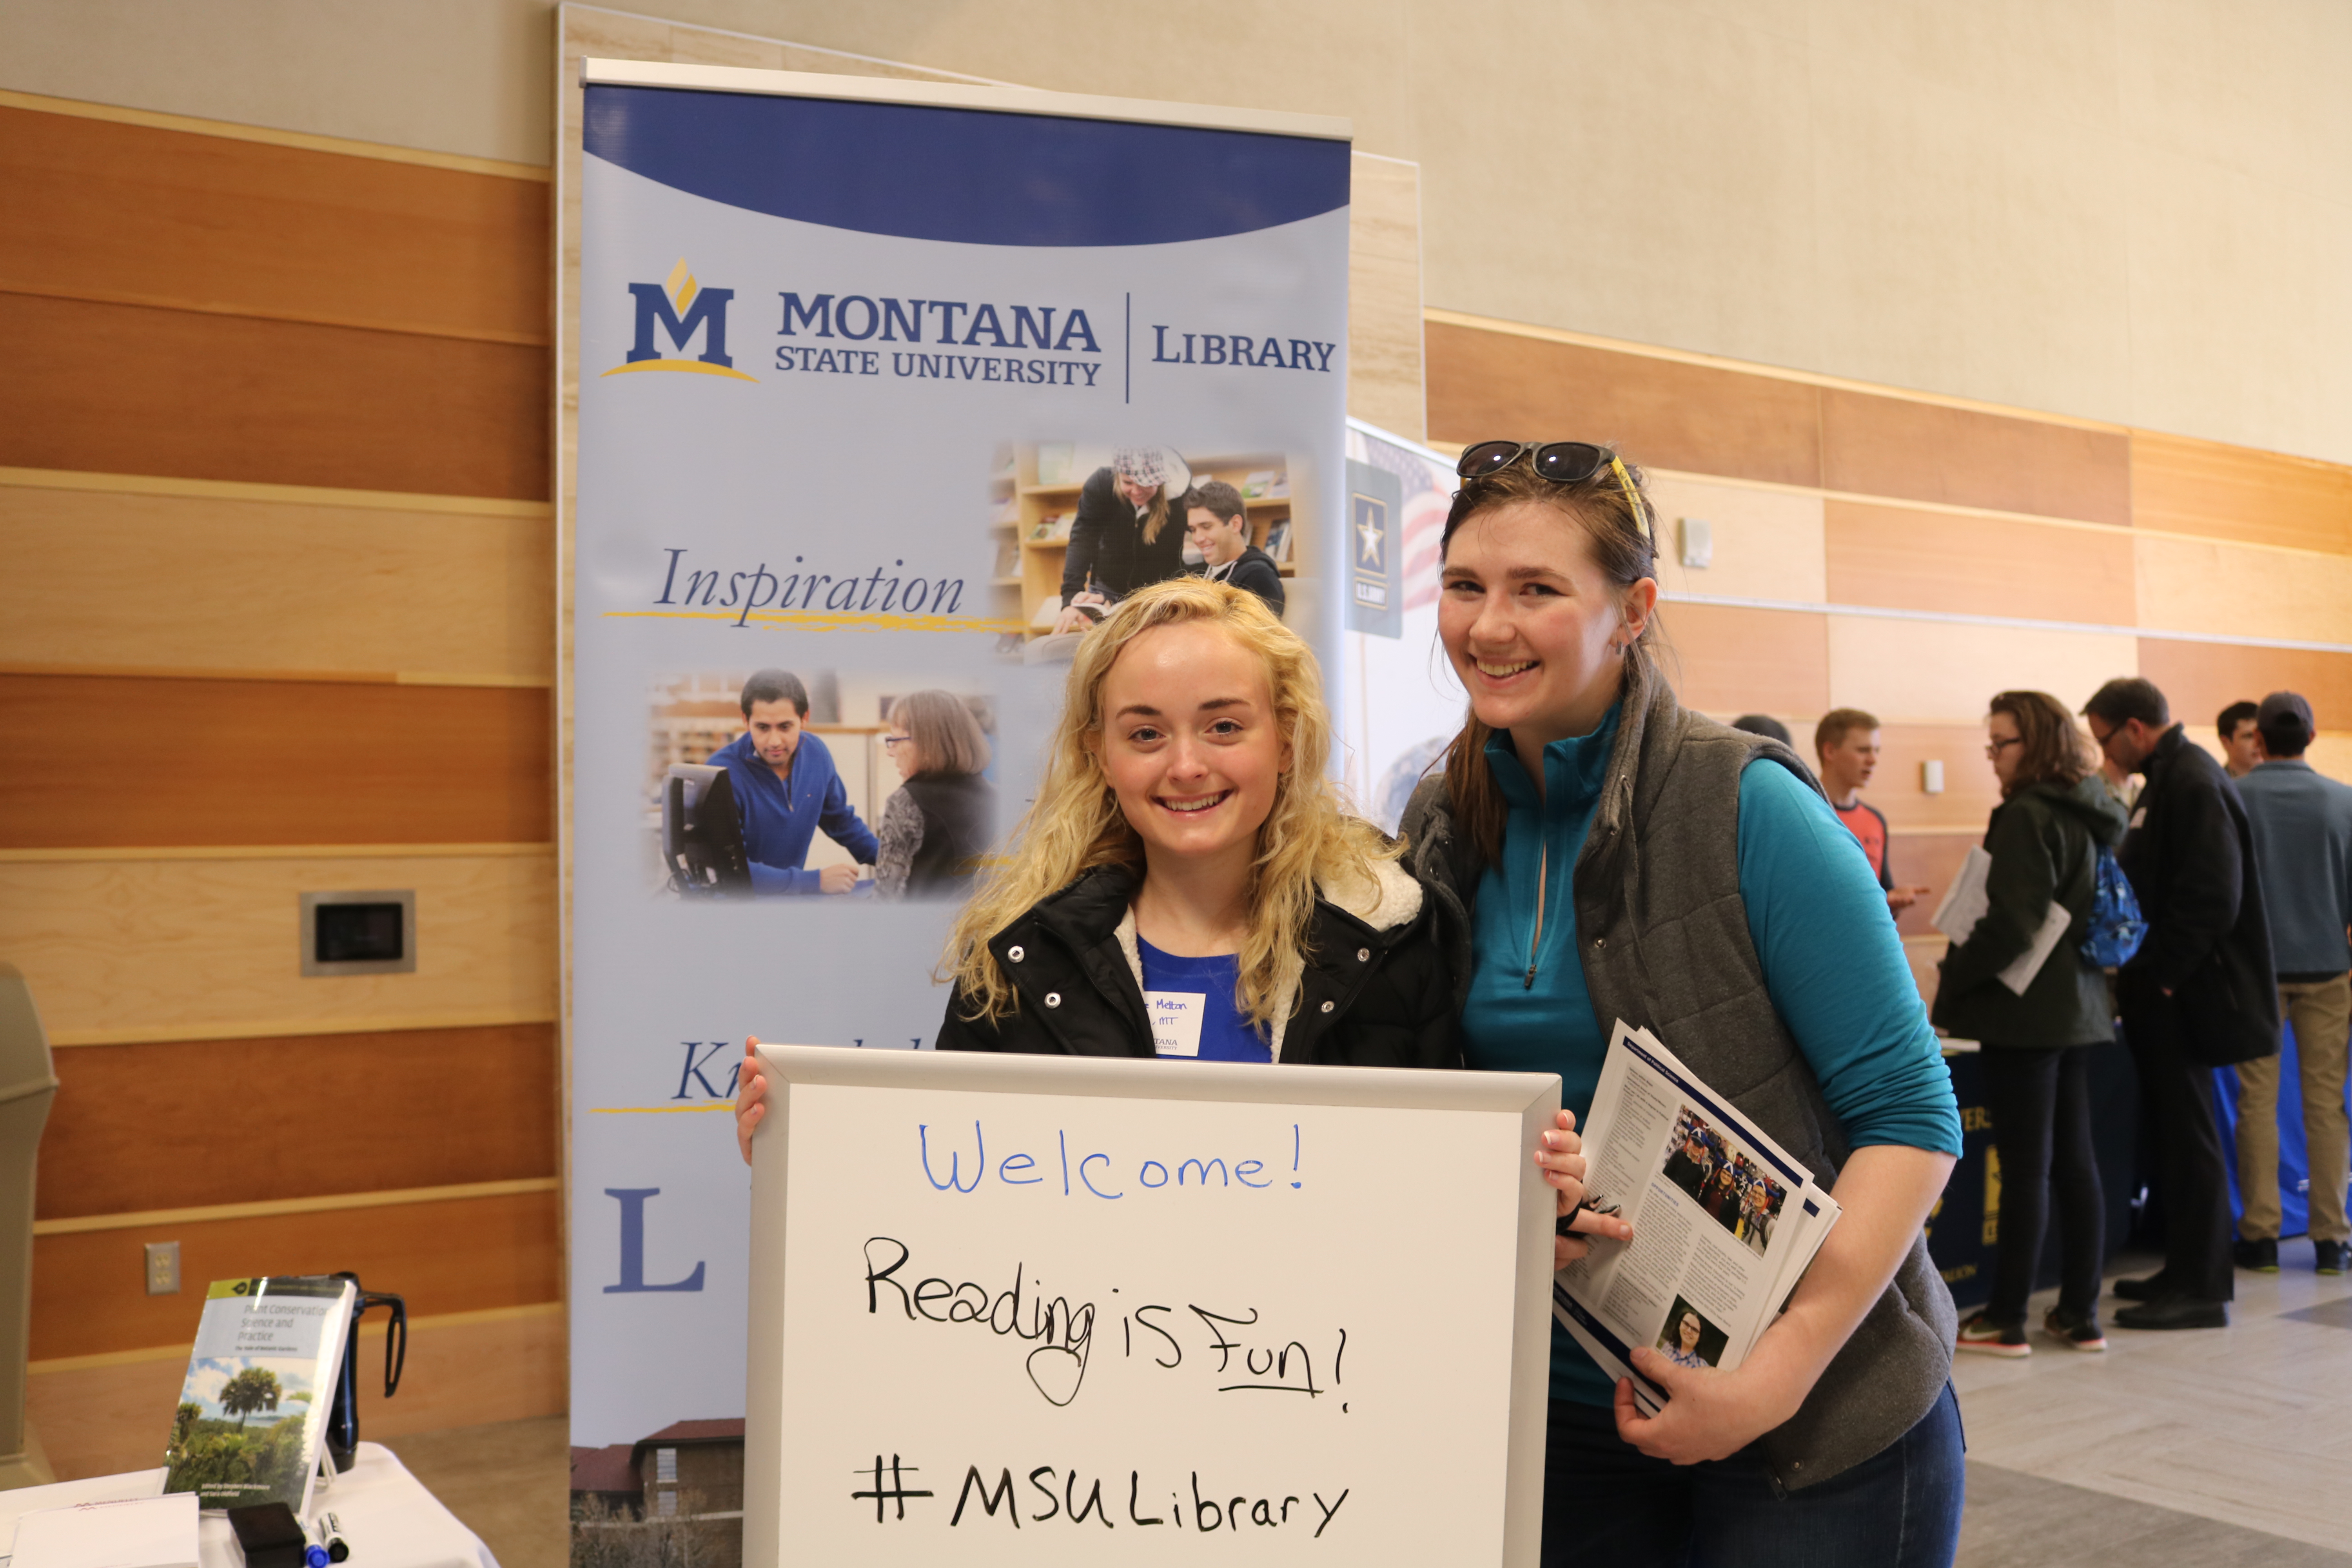 MSU students at a library event; two people smiling